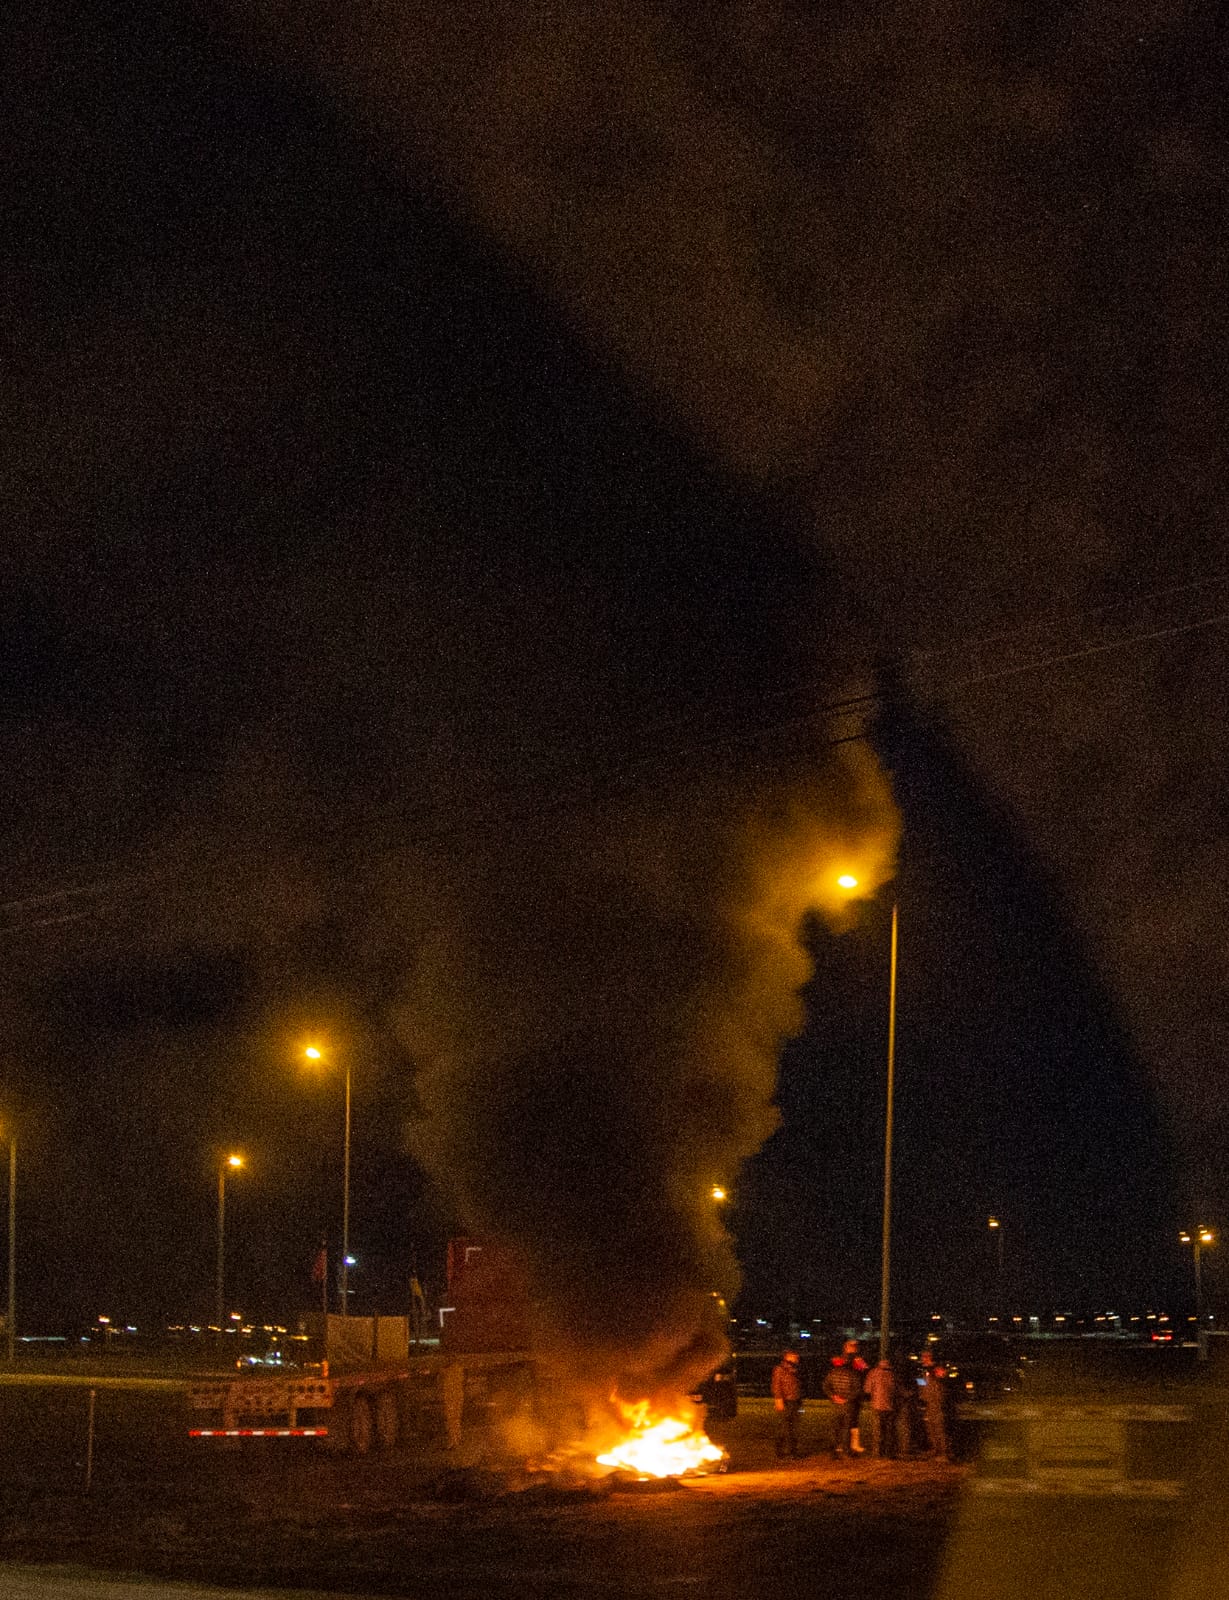 Local Chilean fuel truckers burning tires along the side of the road in protest.